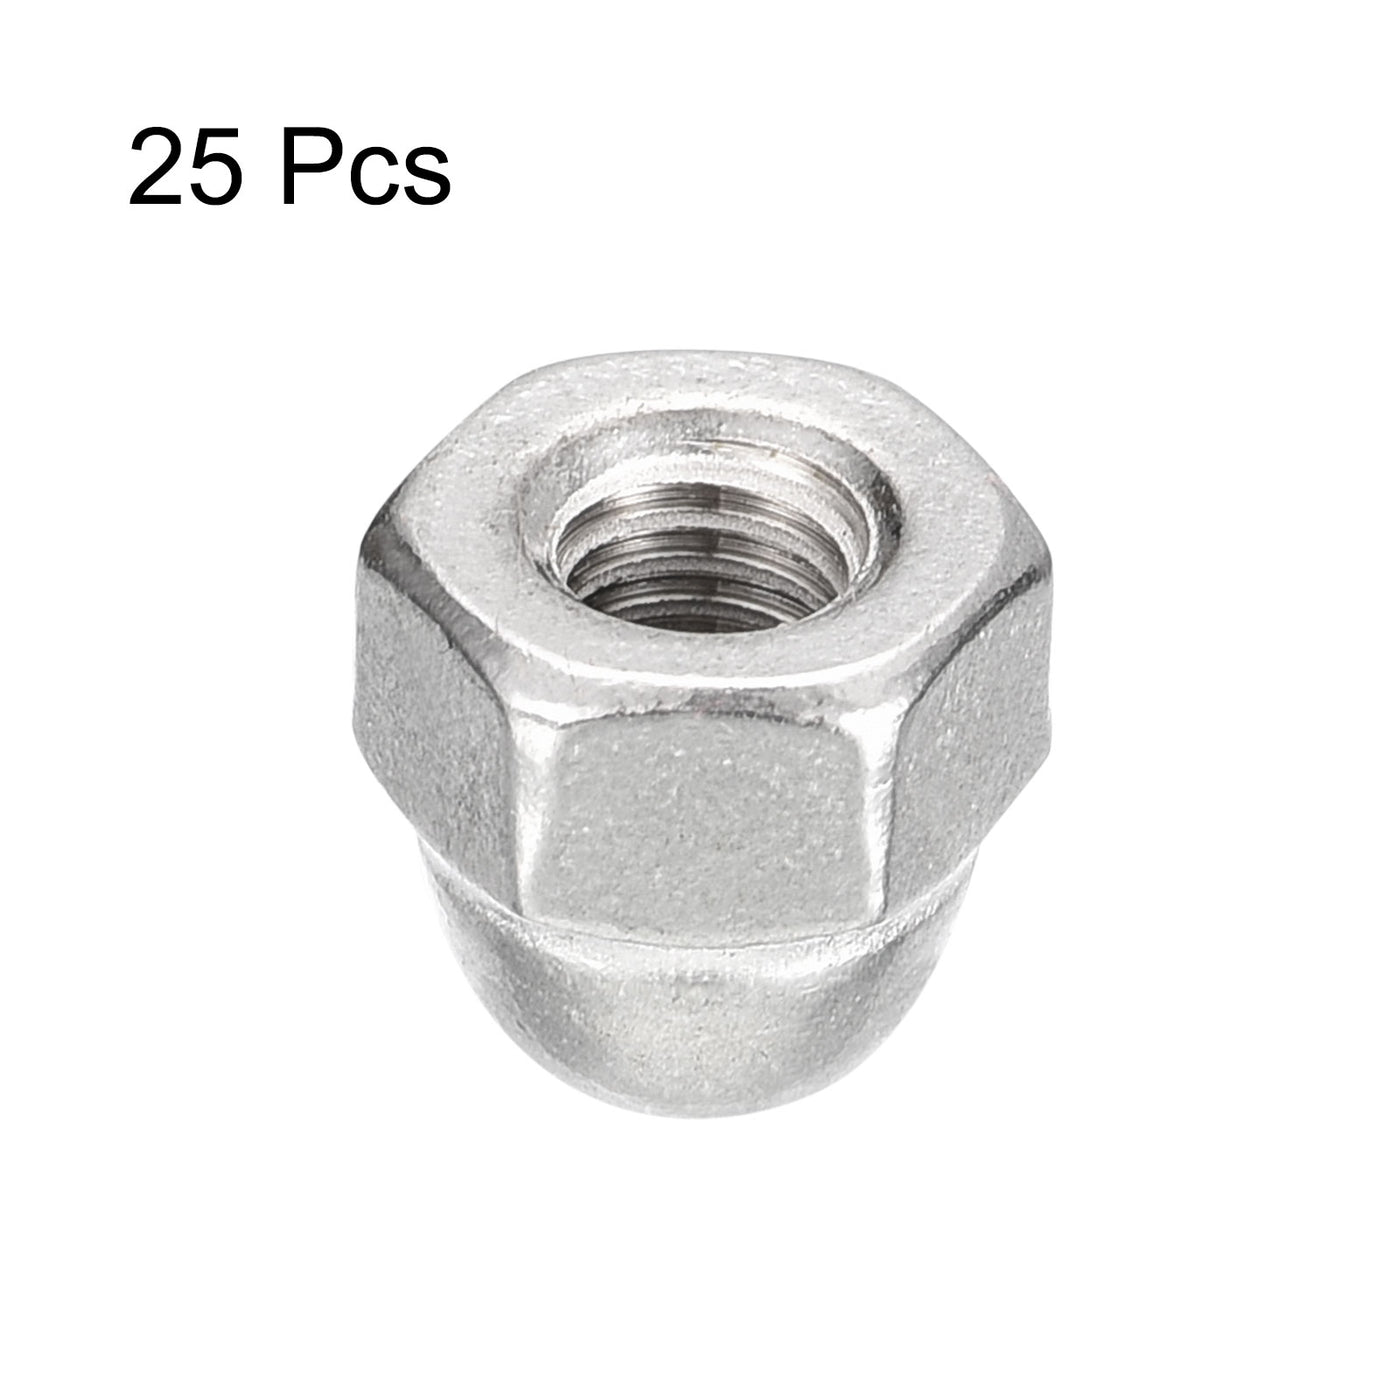 uxcell Uxcell #10-24 Acorn Cap Nuts,25pcs - 304 Stainless Steel Hardware Nuts, Acorn Hex Cap Dome Head Nuts for Fasteners (Silver)